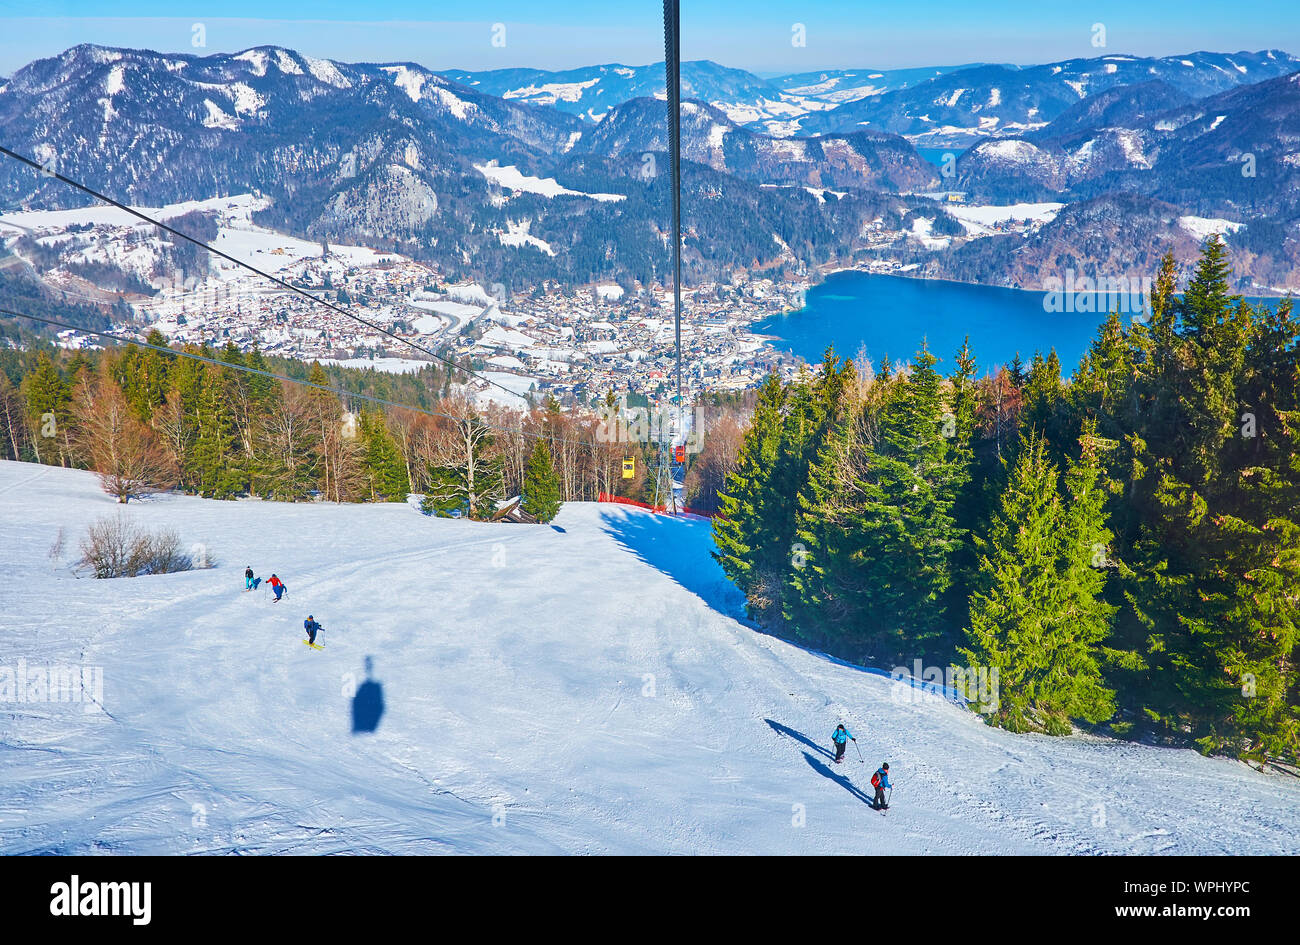 Ride the vintage Zwolferhorn cable car and observe the landscape of Salzkammergut, mountain lake of Wolfgangsee, lush coniferous forests on snowy slop Stock Photo